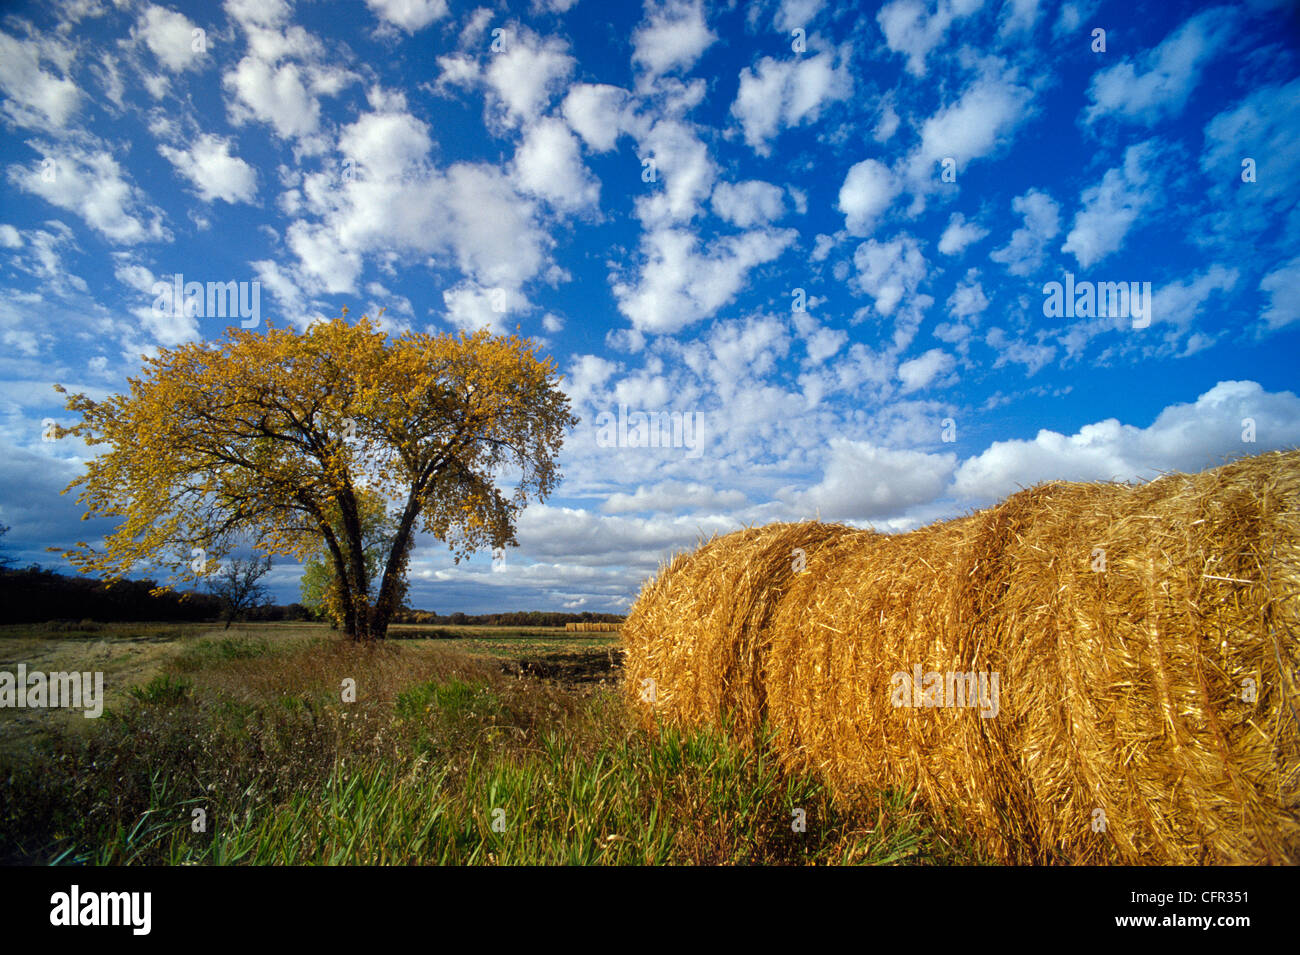 Field and Straw Rolls, St. Adolphe, Manitoba Stock Photo